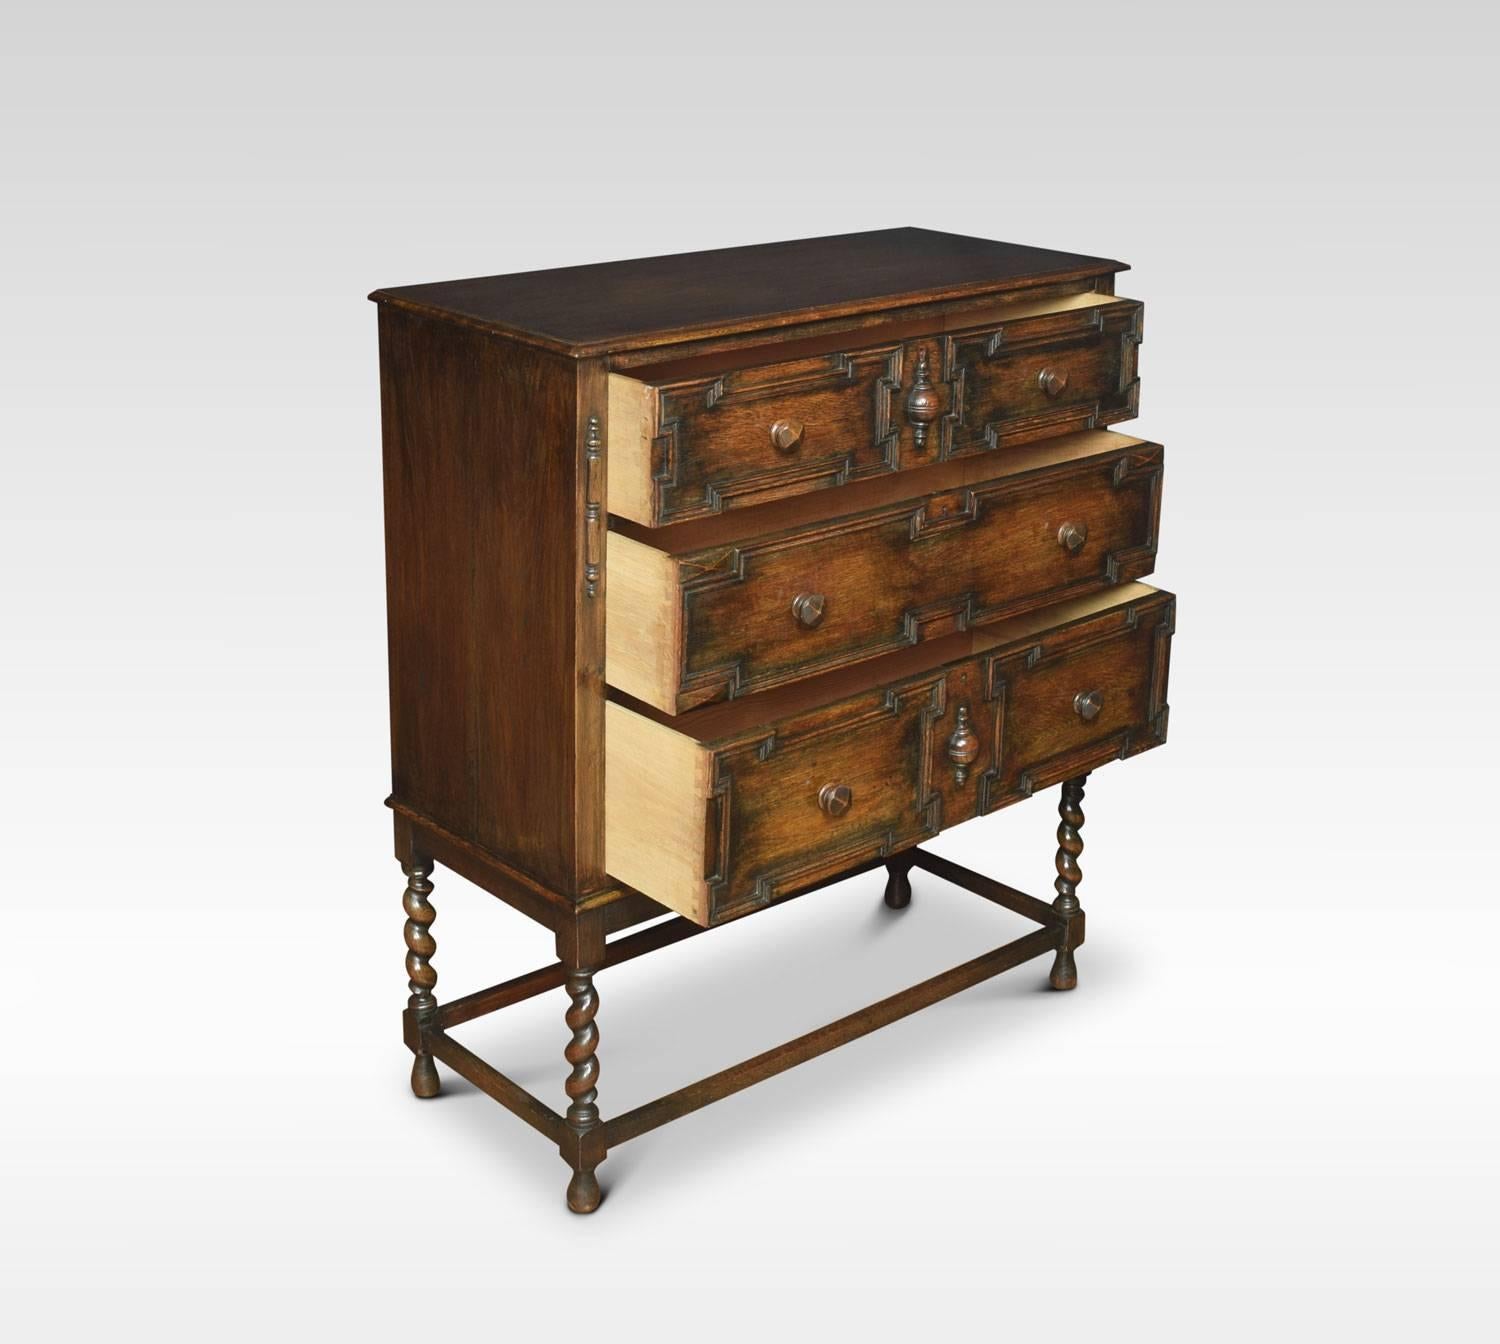 Early 20th century oak chest of Jacobean design, the large rectangular top with moulded edge above three graduated moulded drawers, flanked by carved pilasters. All raised up on barley twist supports united by stretchers.
Dimensions:
Height 47.5